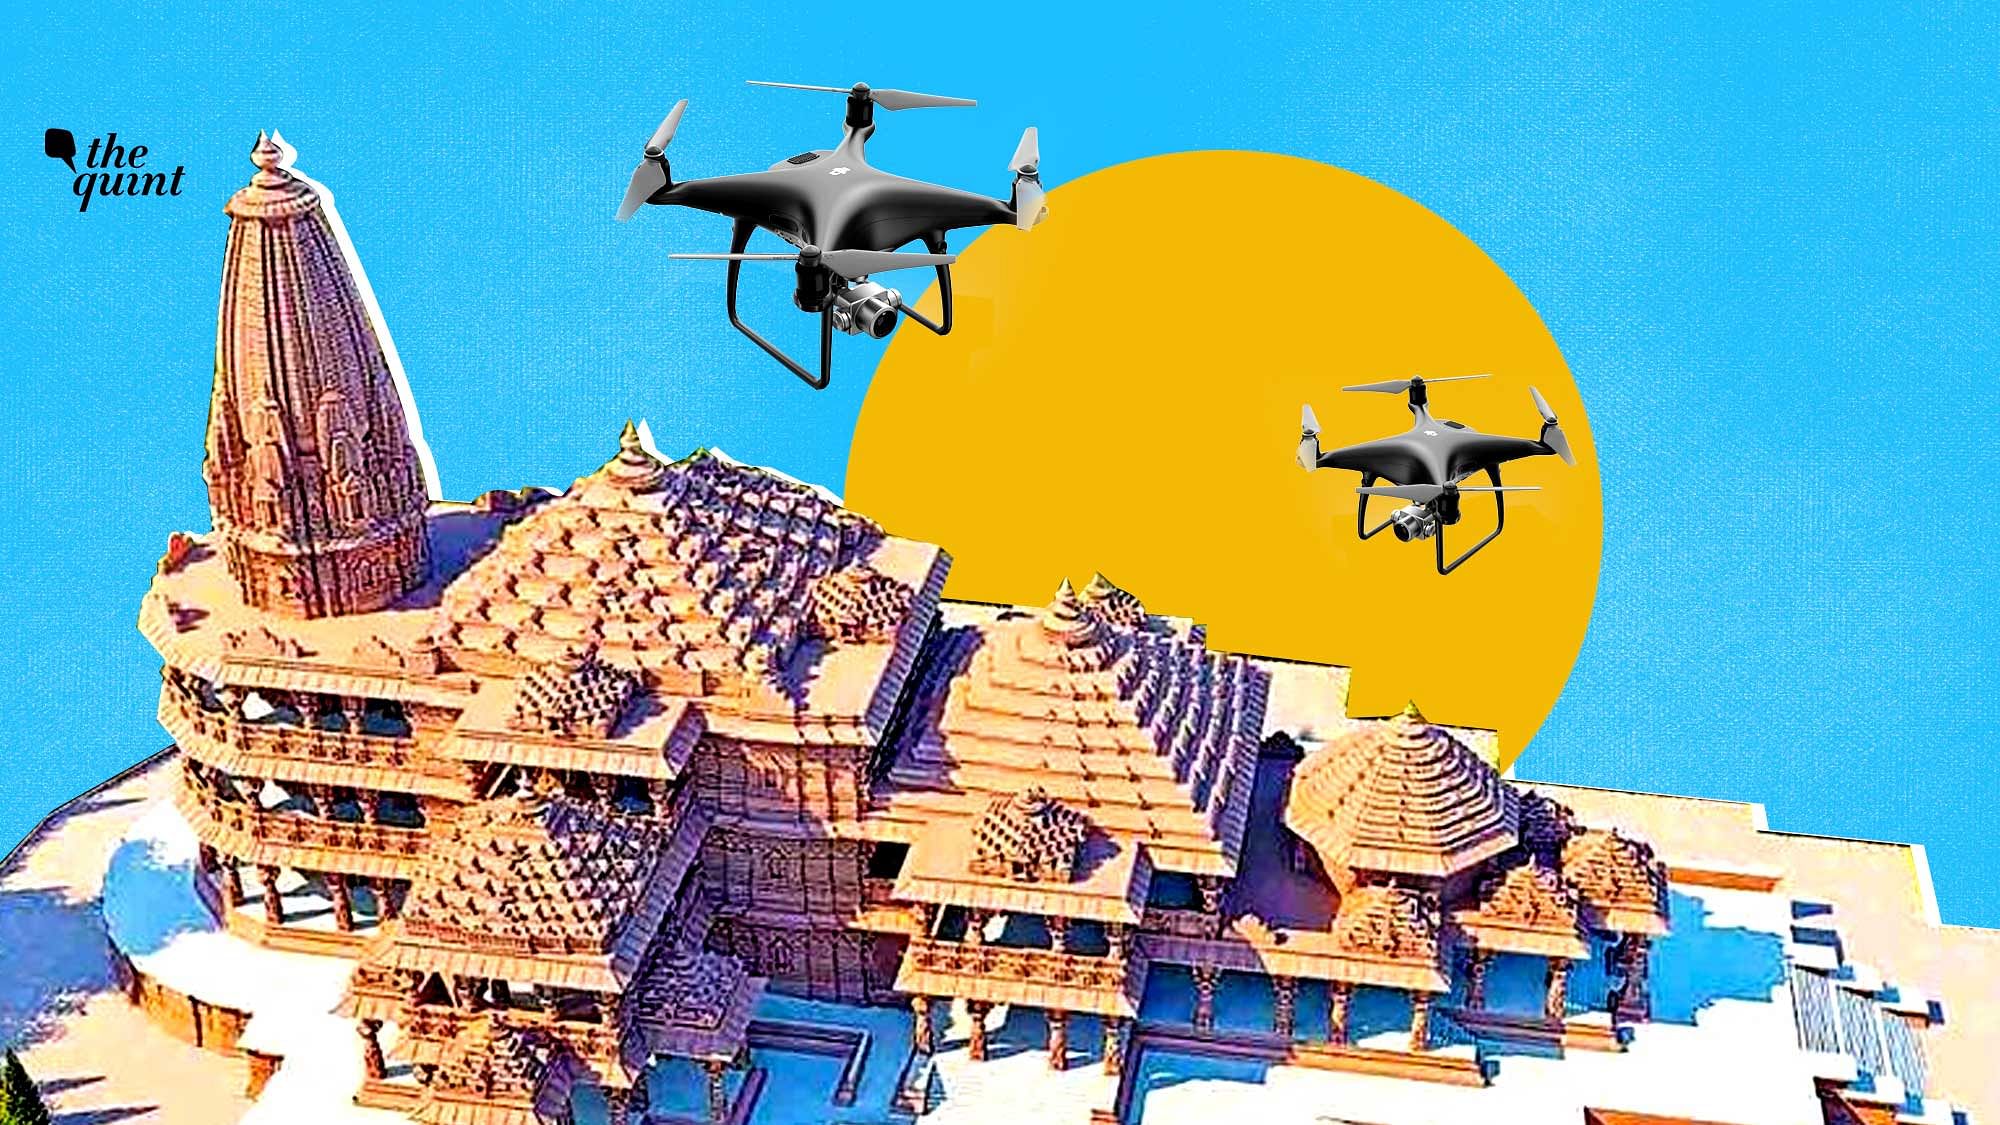 DJI system’s Phantom drones were used as part of the security arrangements, a senior officer of Ayodhya Police told The Quint 